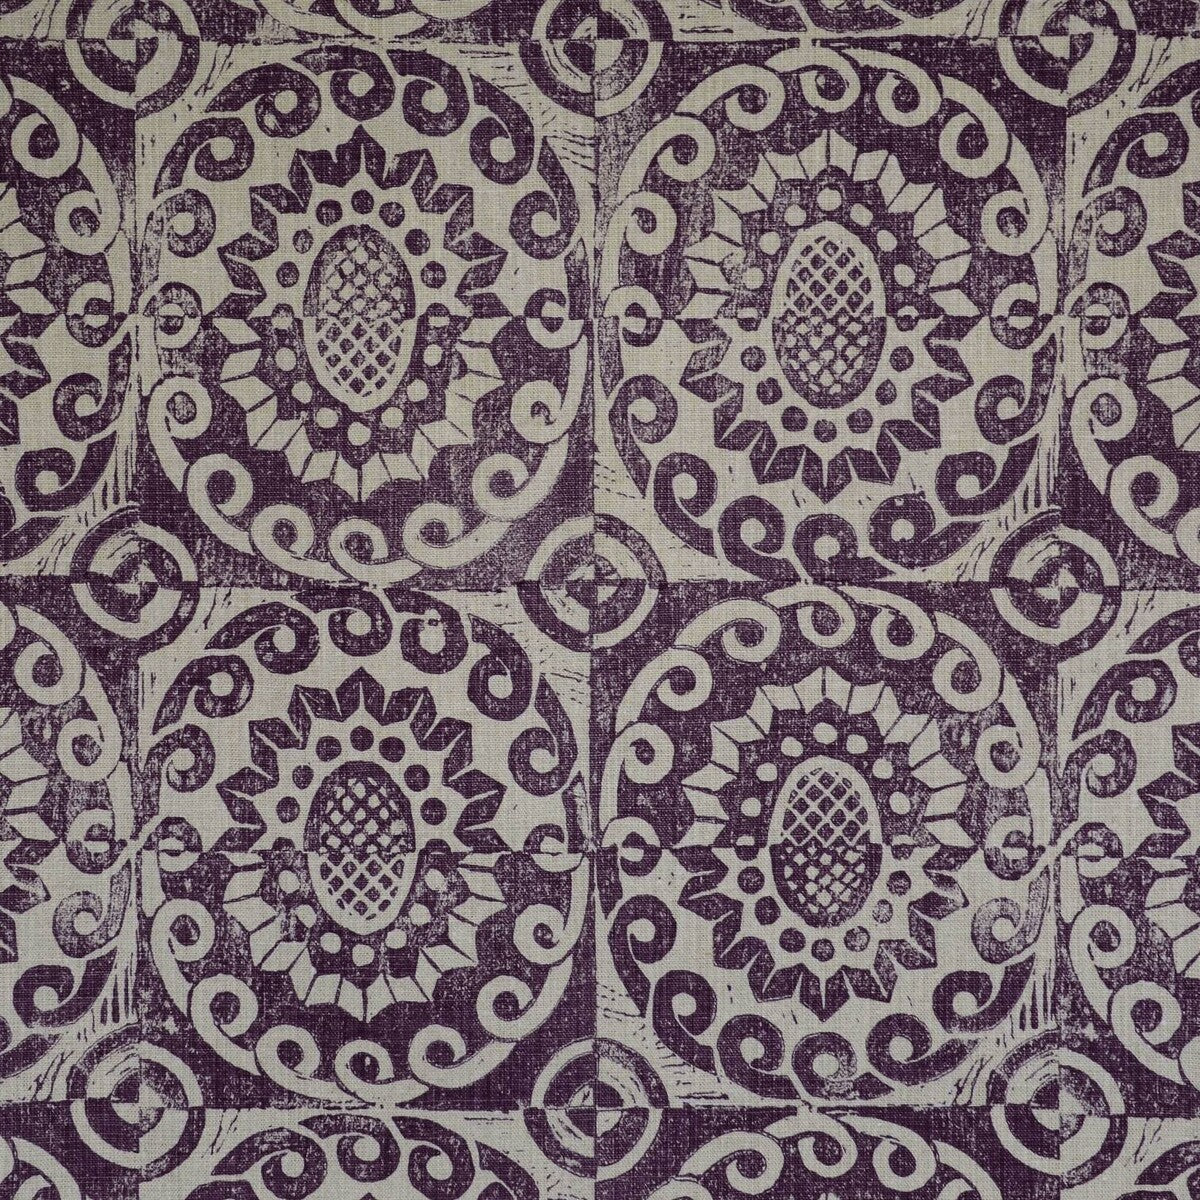 Pineapple On Rustic fabric in aubergine color - pattern BFC-3629.10.0 - by Lee Jofa in the Blithfield collection